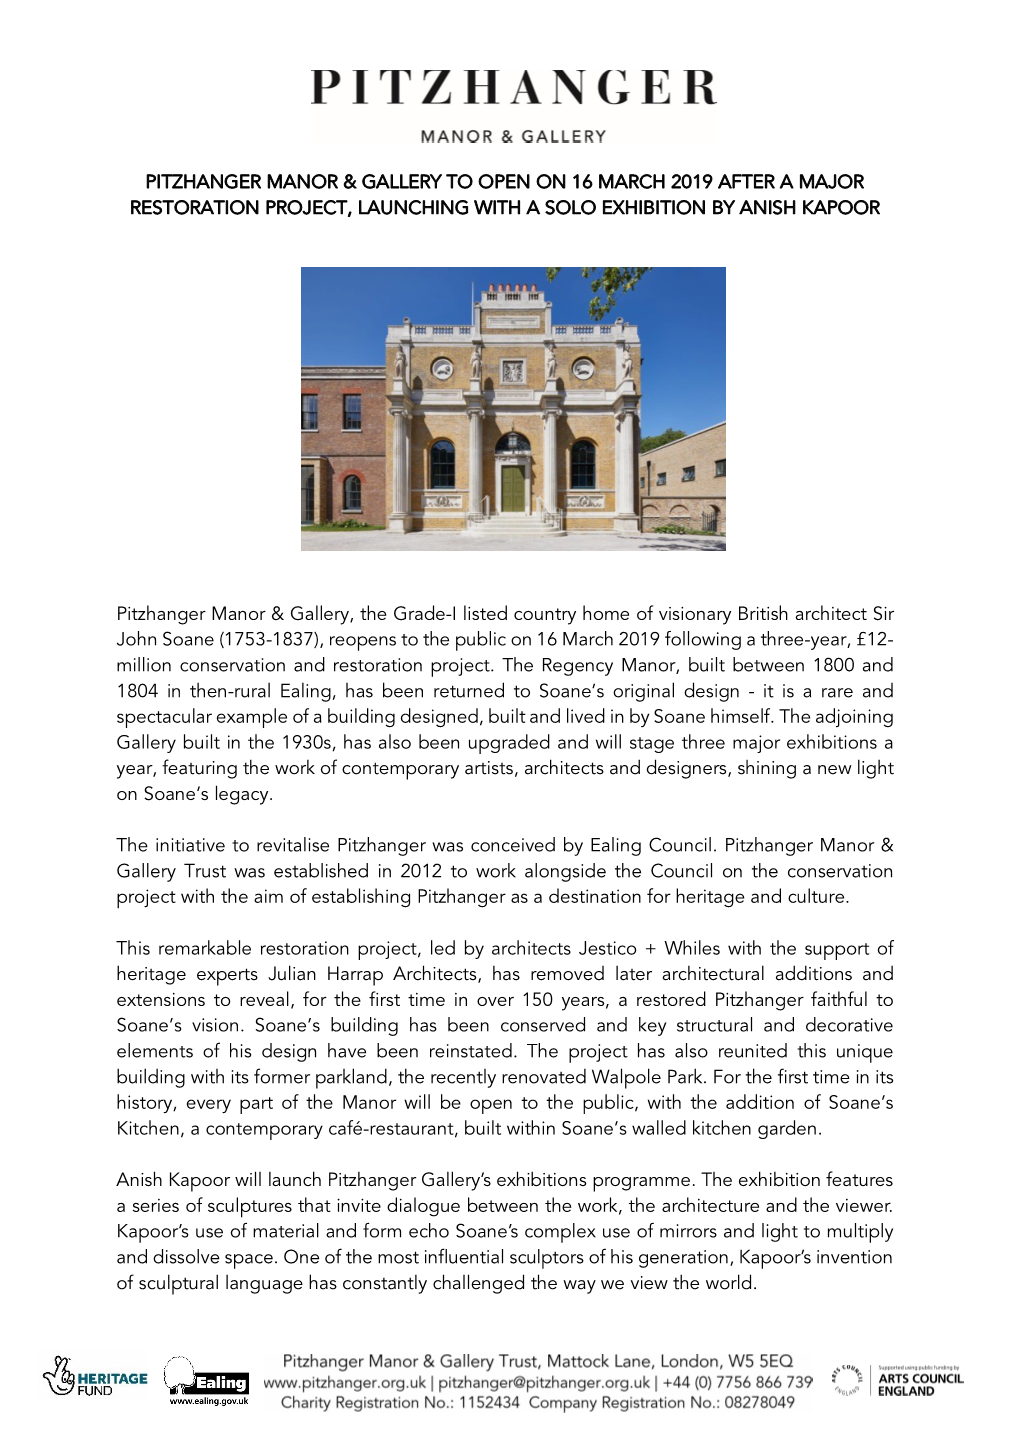 Pitzhanger Manor & Gallery Opening March 2019 – Press Release